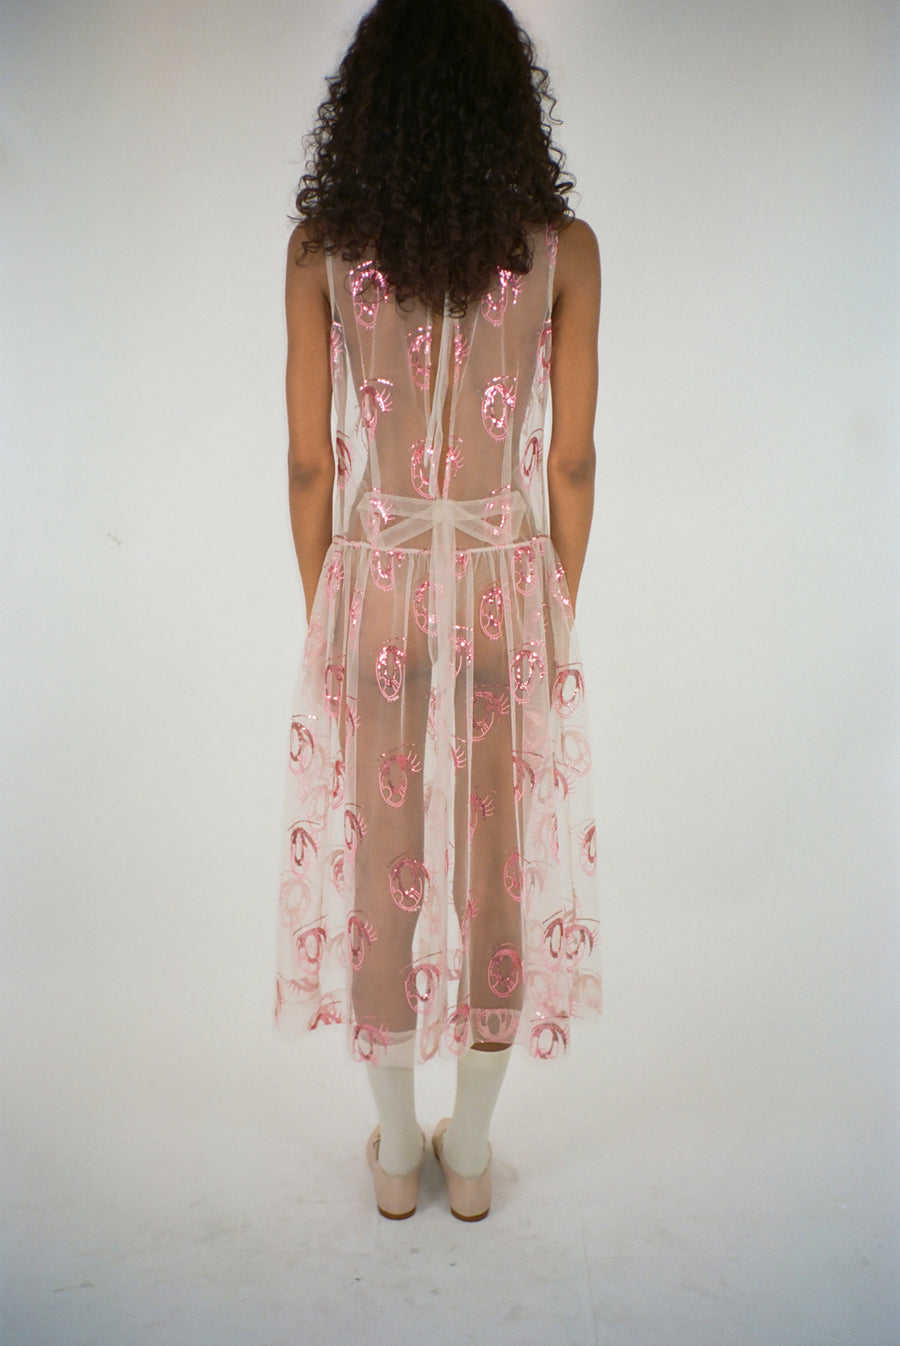 Midi length dress in pink tulle with anime eye print on model